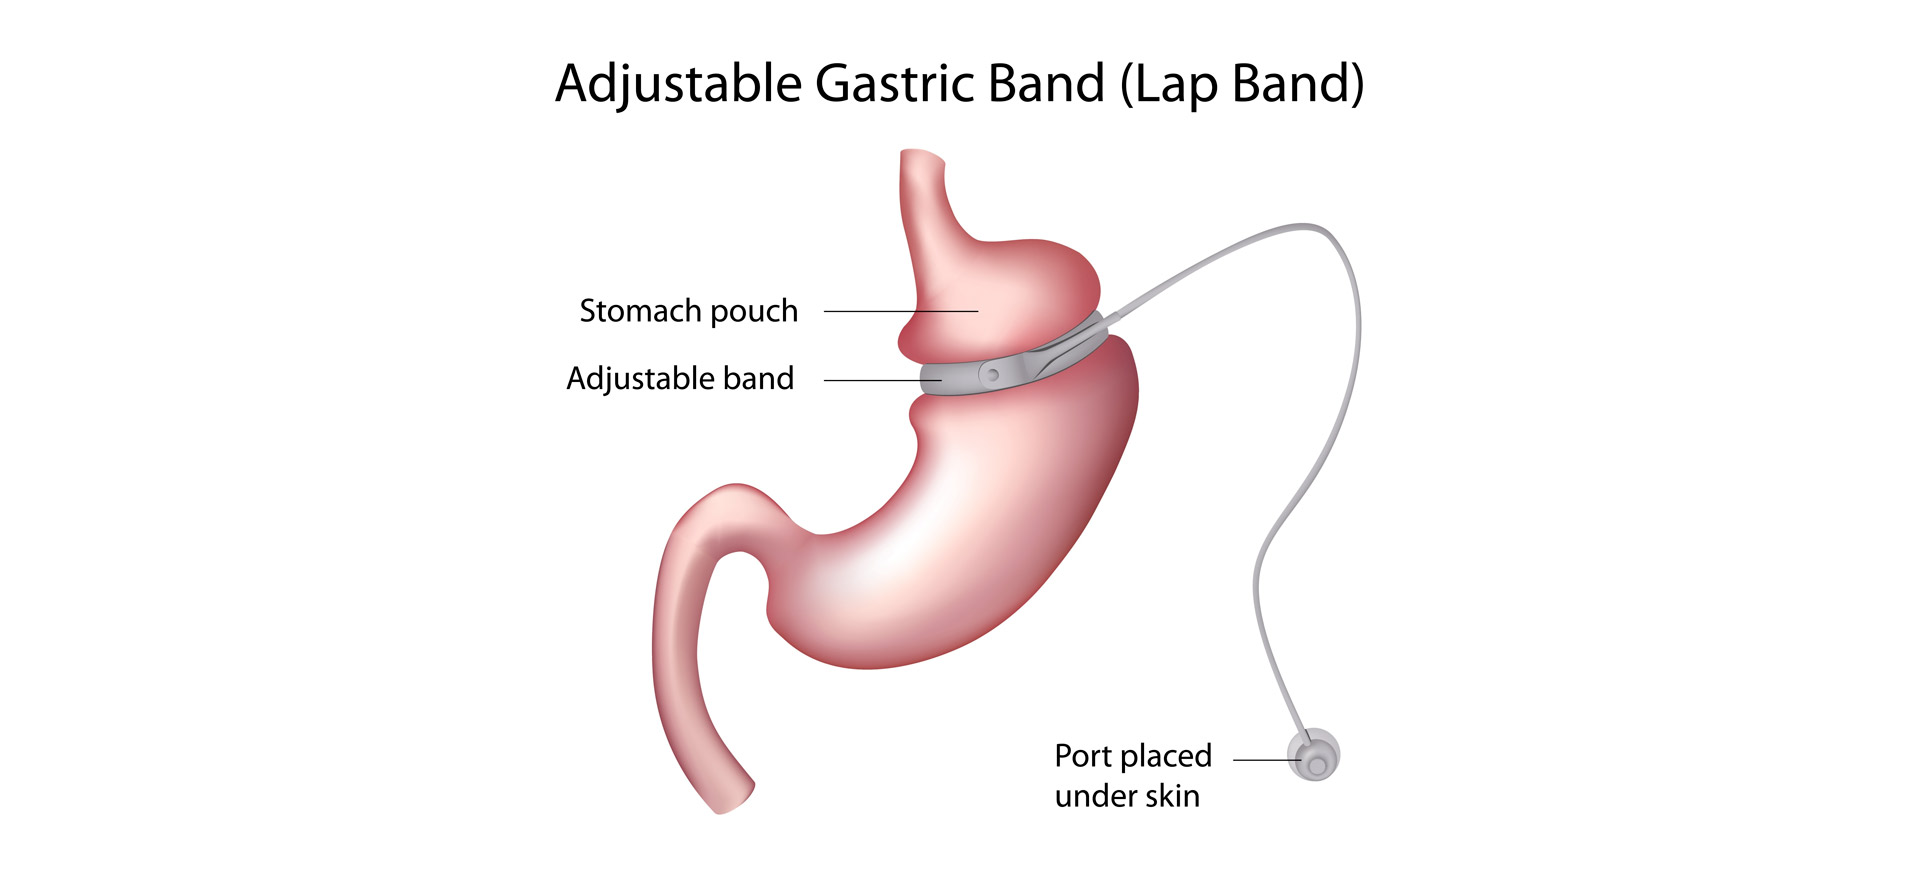 Gastric Band Weight Loss Surgery.Band with a Port that Under the Skin Stock  Vector - Illustration of anatomy, vector: 182786723